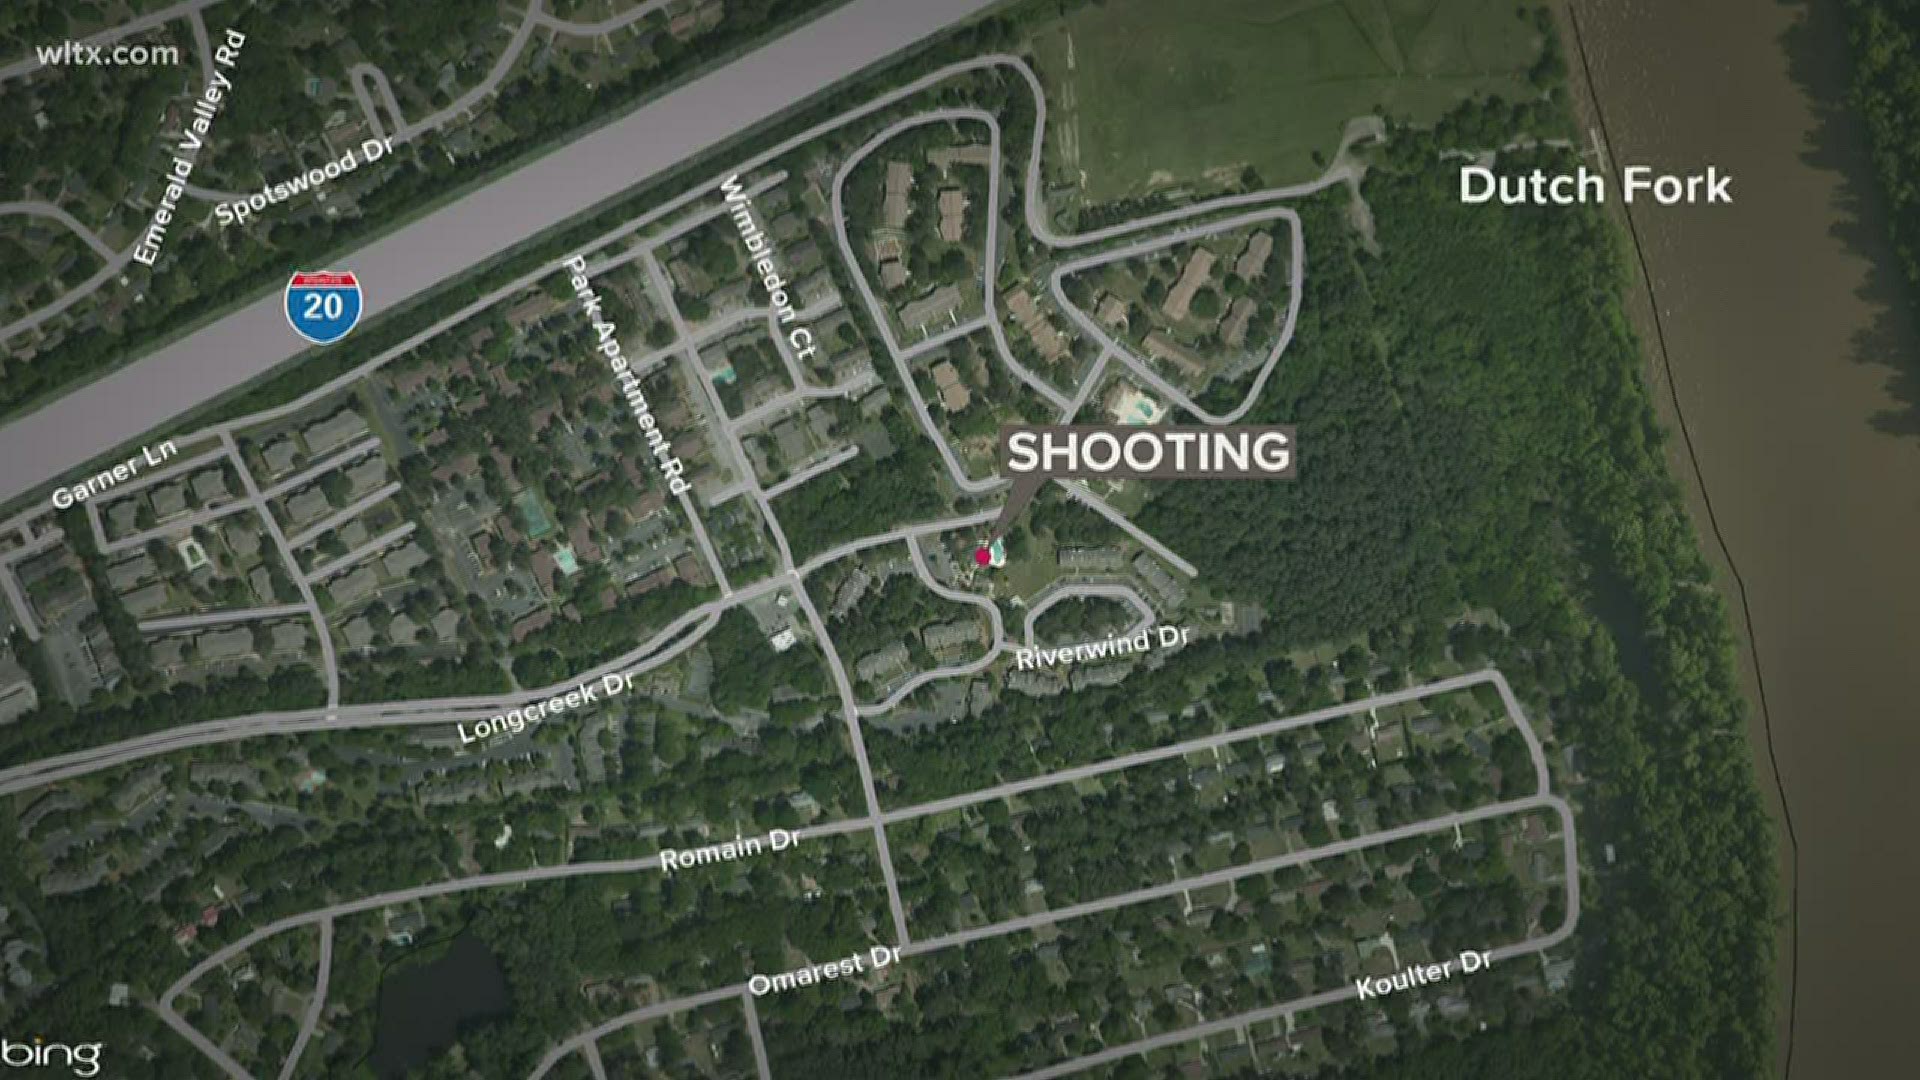 The shooting happened around 9:20 p.m. Tuesday in the 1600 block of Longcreek Drive in the St. Andrews area.